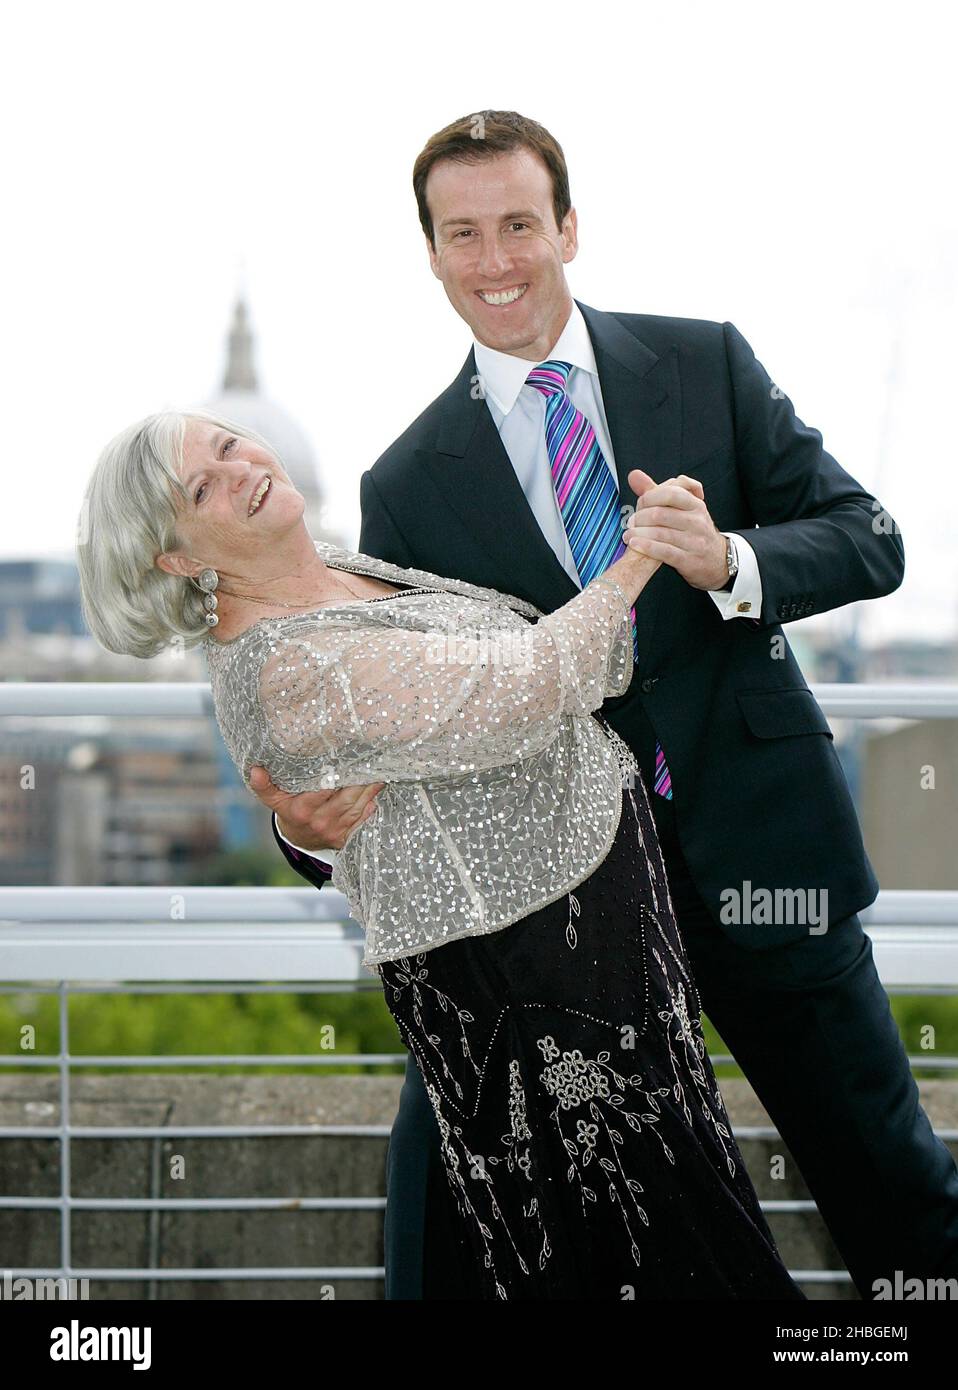 Ann Widdecombe and Anton du Beke launch Bupa's Shall We Dance campaign, highlighting the health benefits of dancing to over 75s, at the National Theatre, South Bank, London. The campaign is calling for communities to contact their local care home to help get 30,000 people dancing in June after a Bupa report highlighted how dance can help improve mental and physical wellbeing and aid in the treatment of conditions like dementia and Parkinson's. Stock Photo